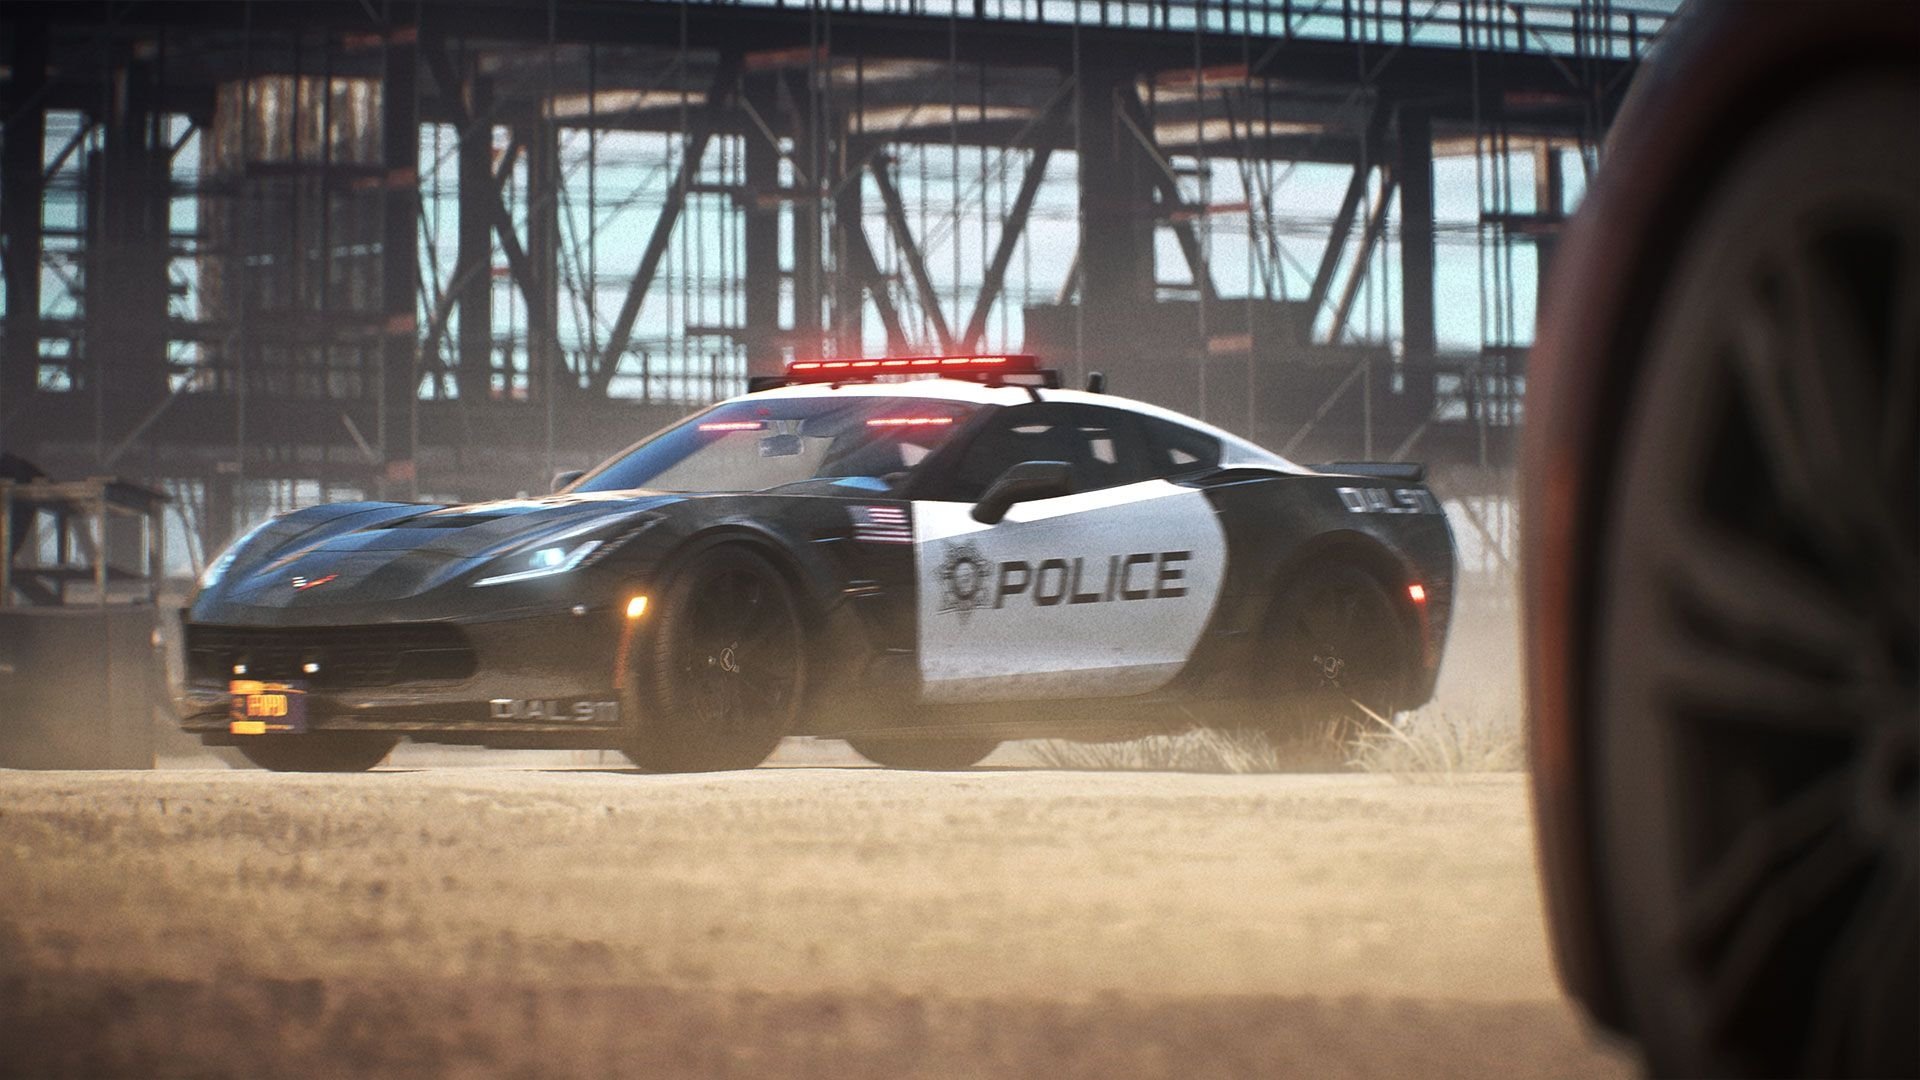 need for speed pc game download full